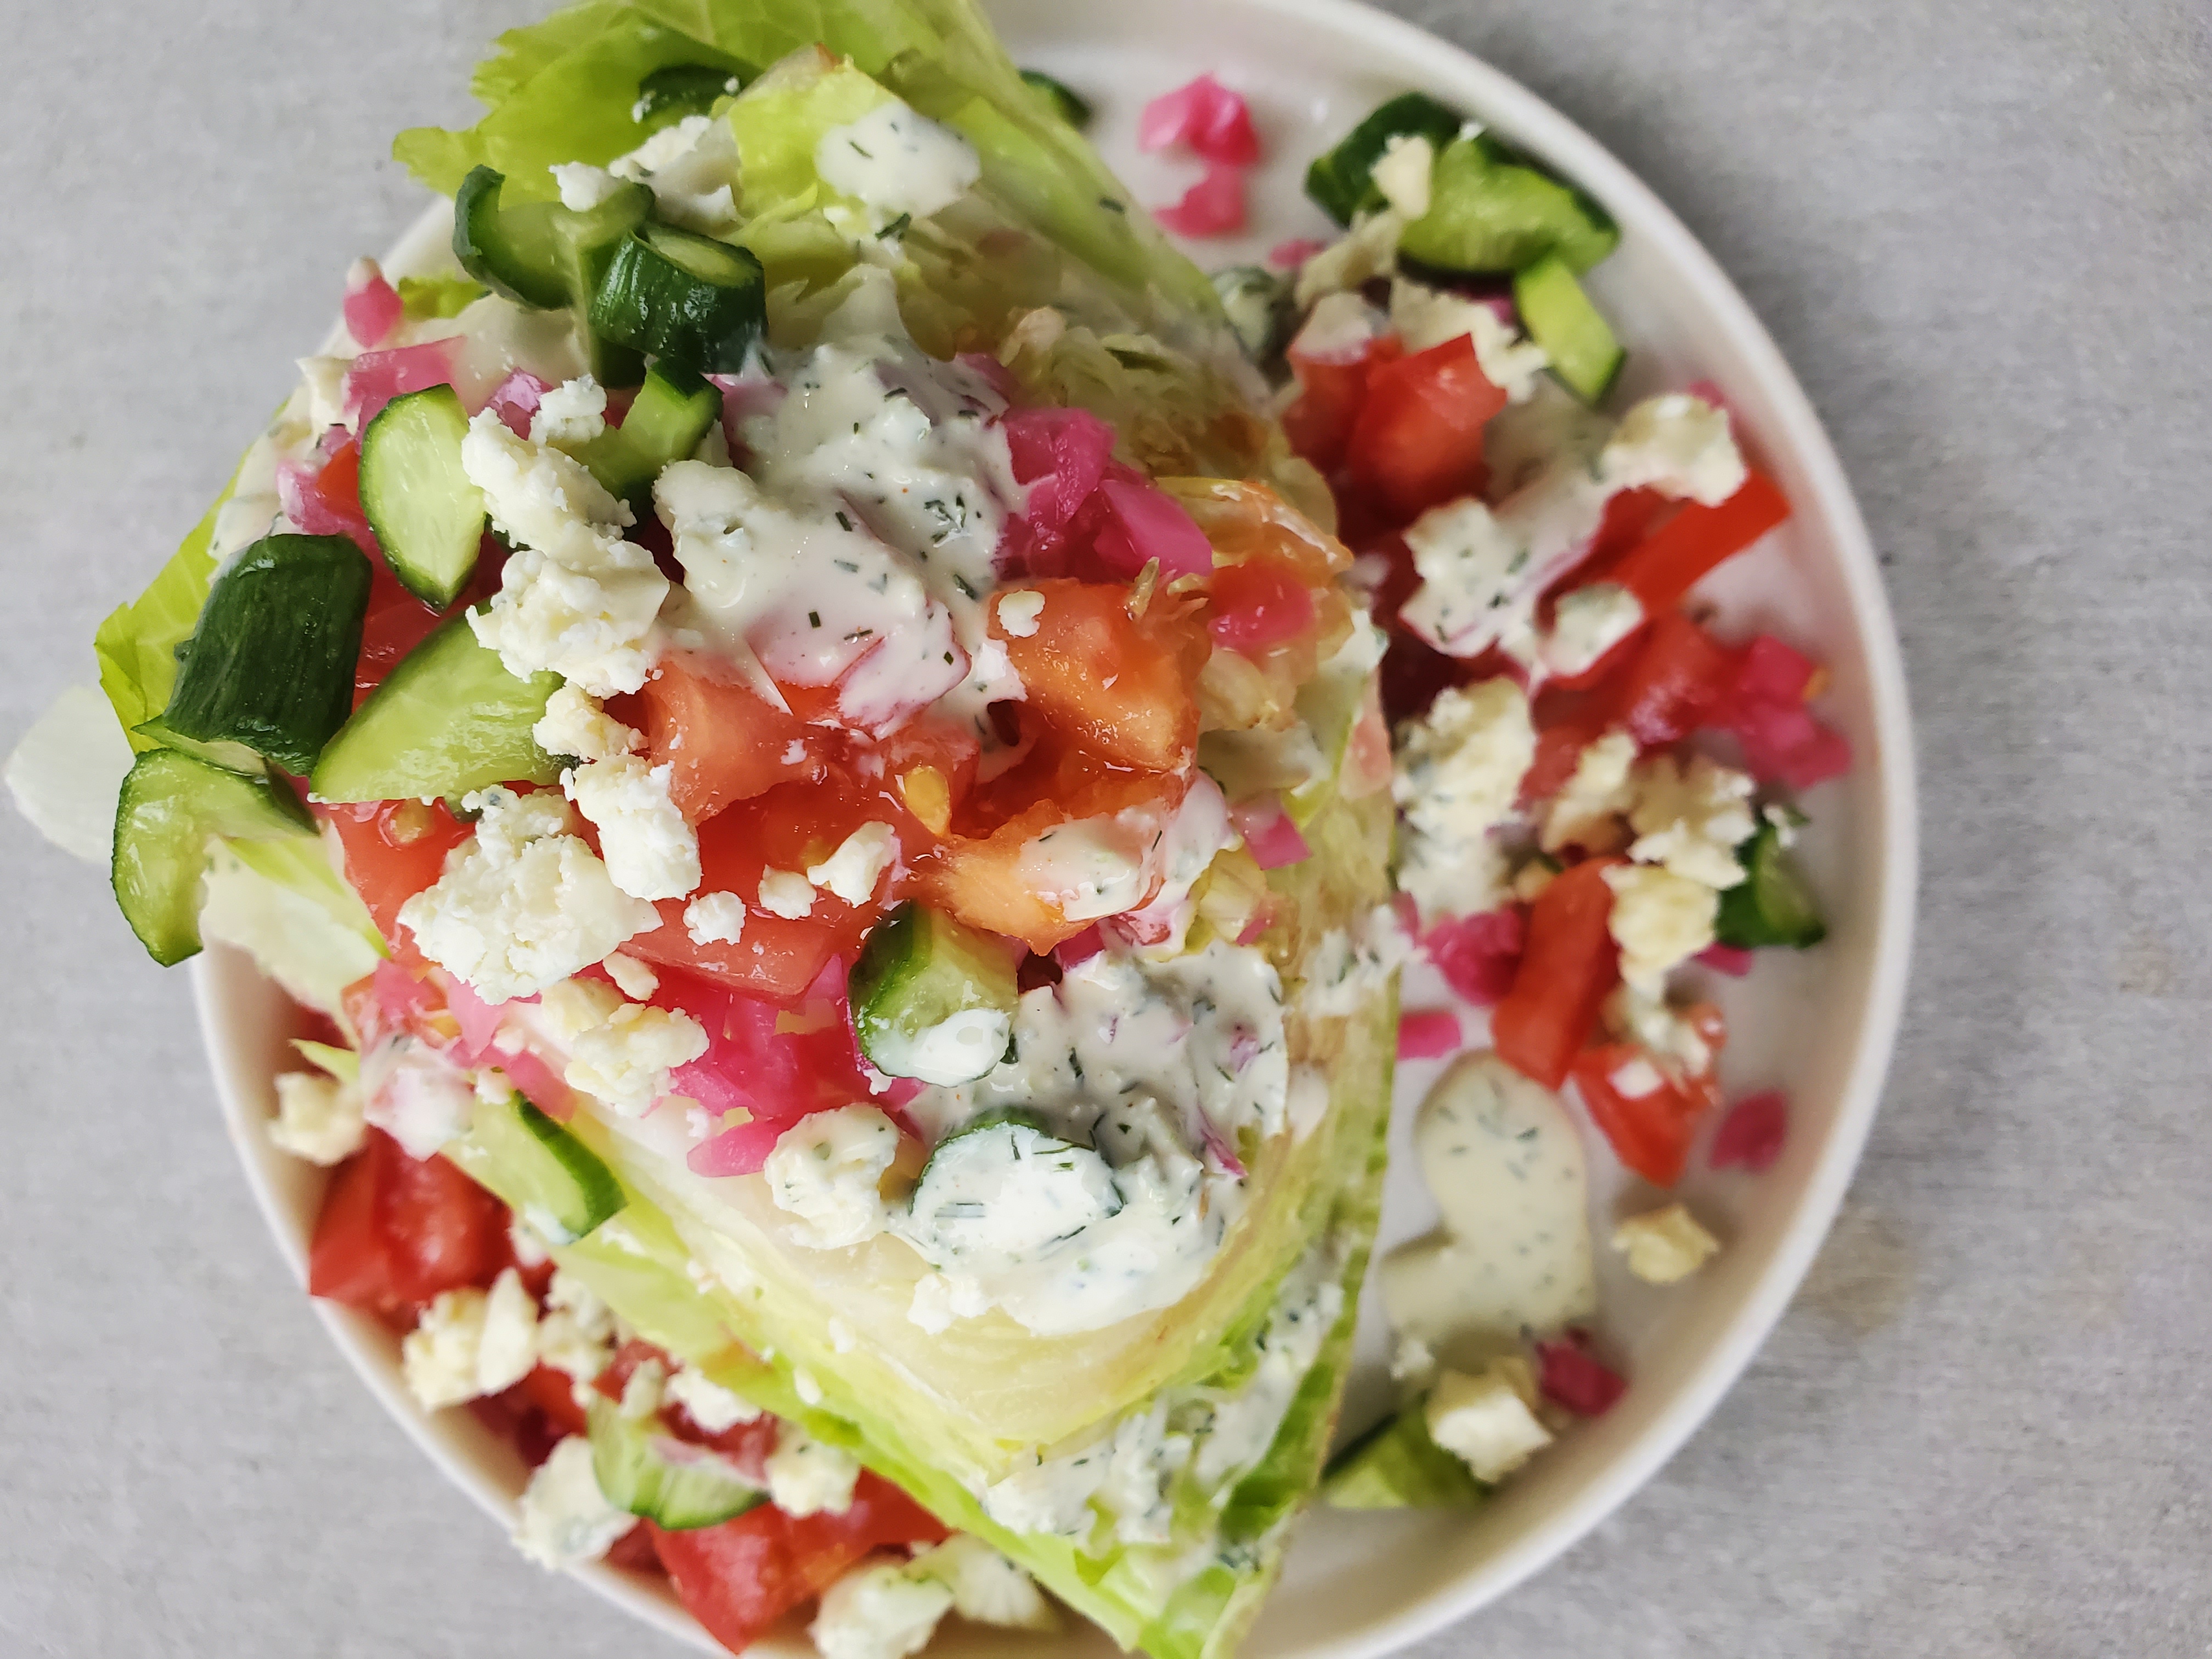 Iceberg Wedge Salad with all the toppings on a plate